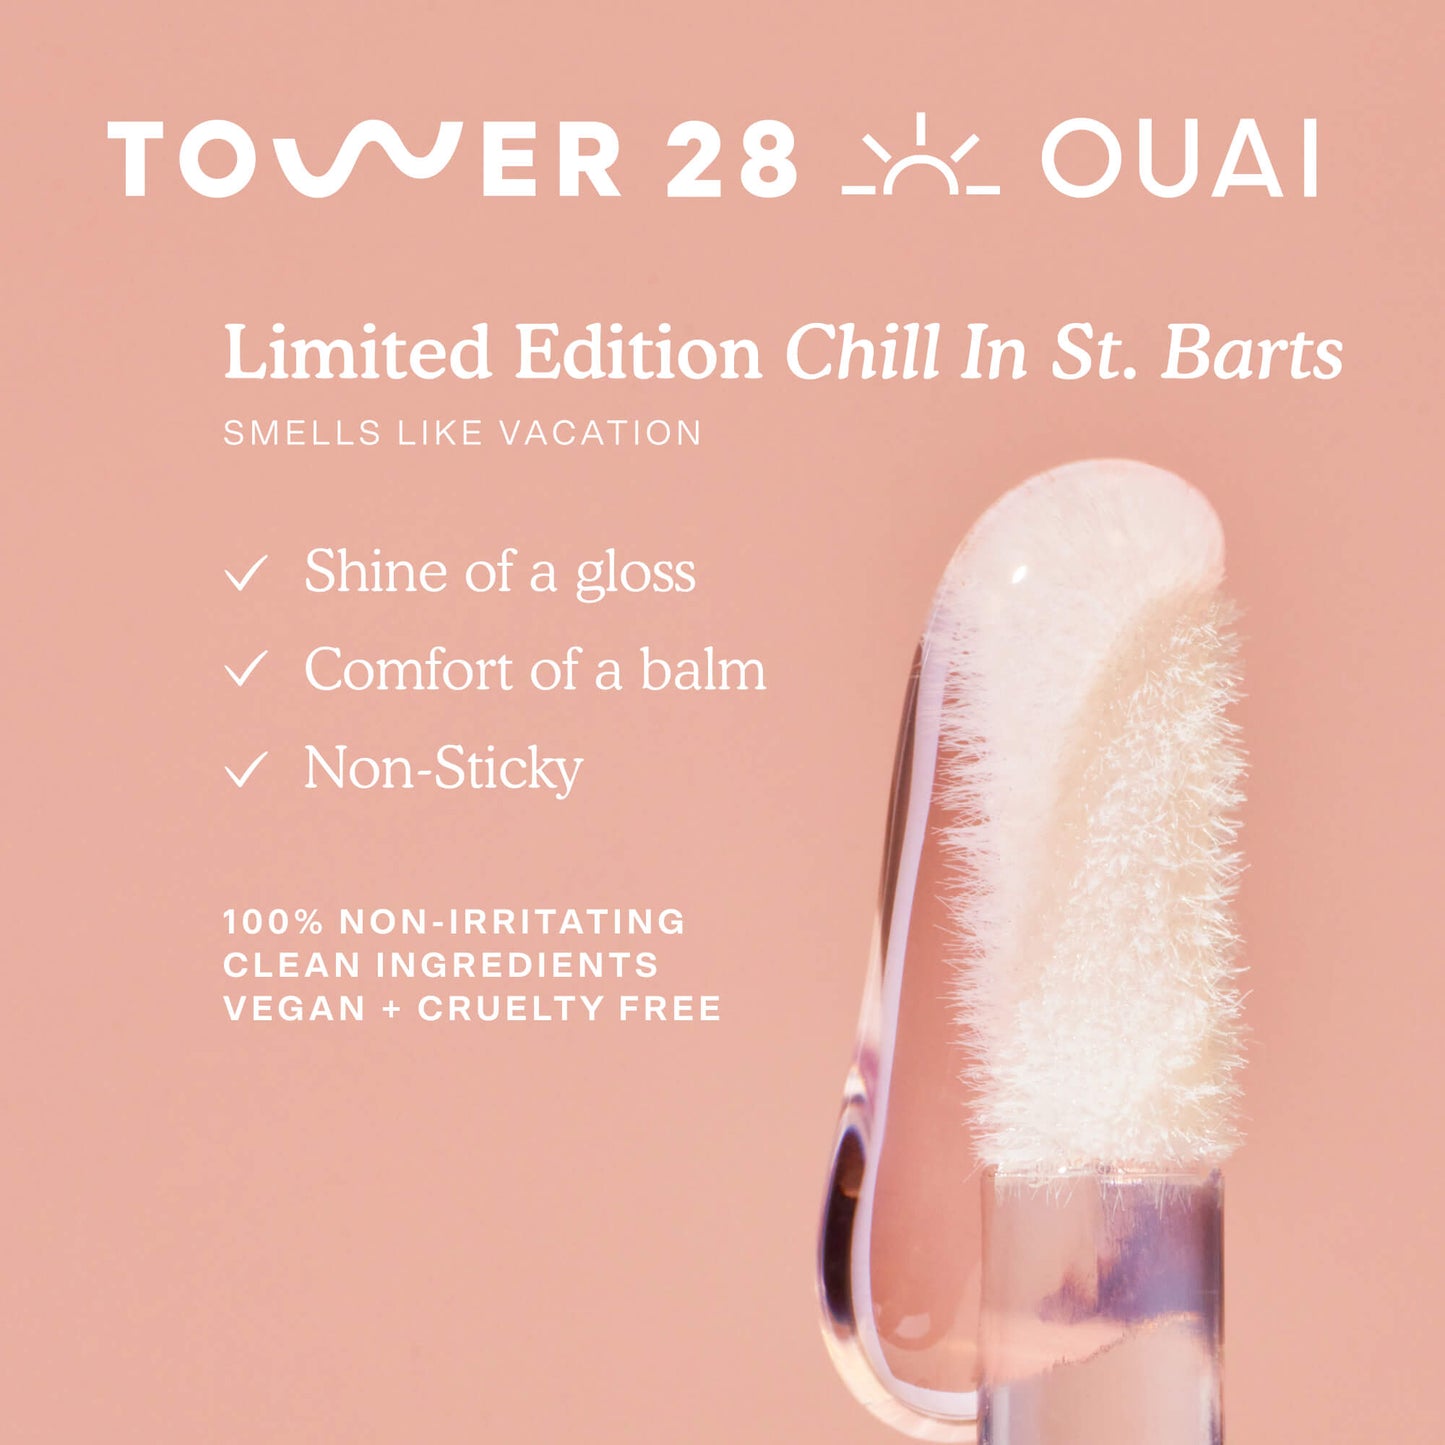 [A description of how Tower 28 x OUAI ShineOn Lip Jelly in Chill In St. Barts looks and feels]